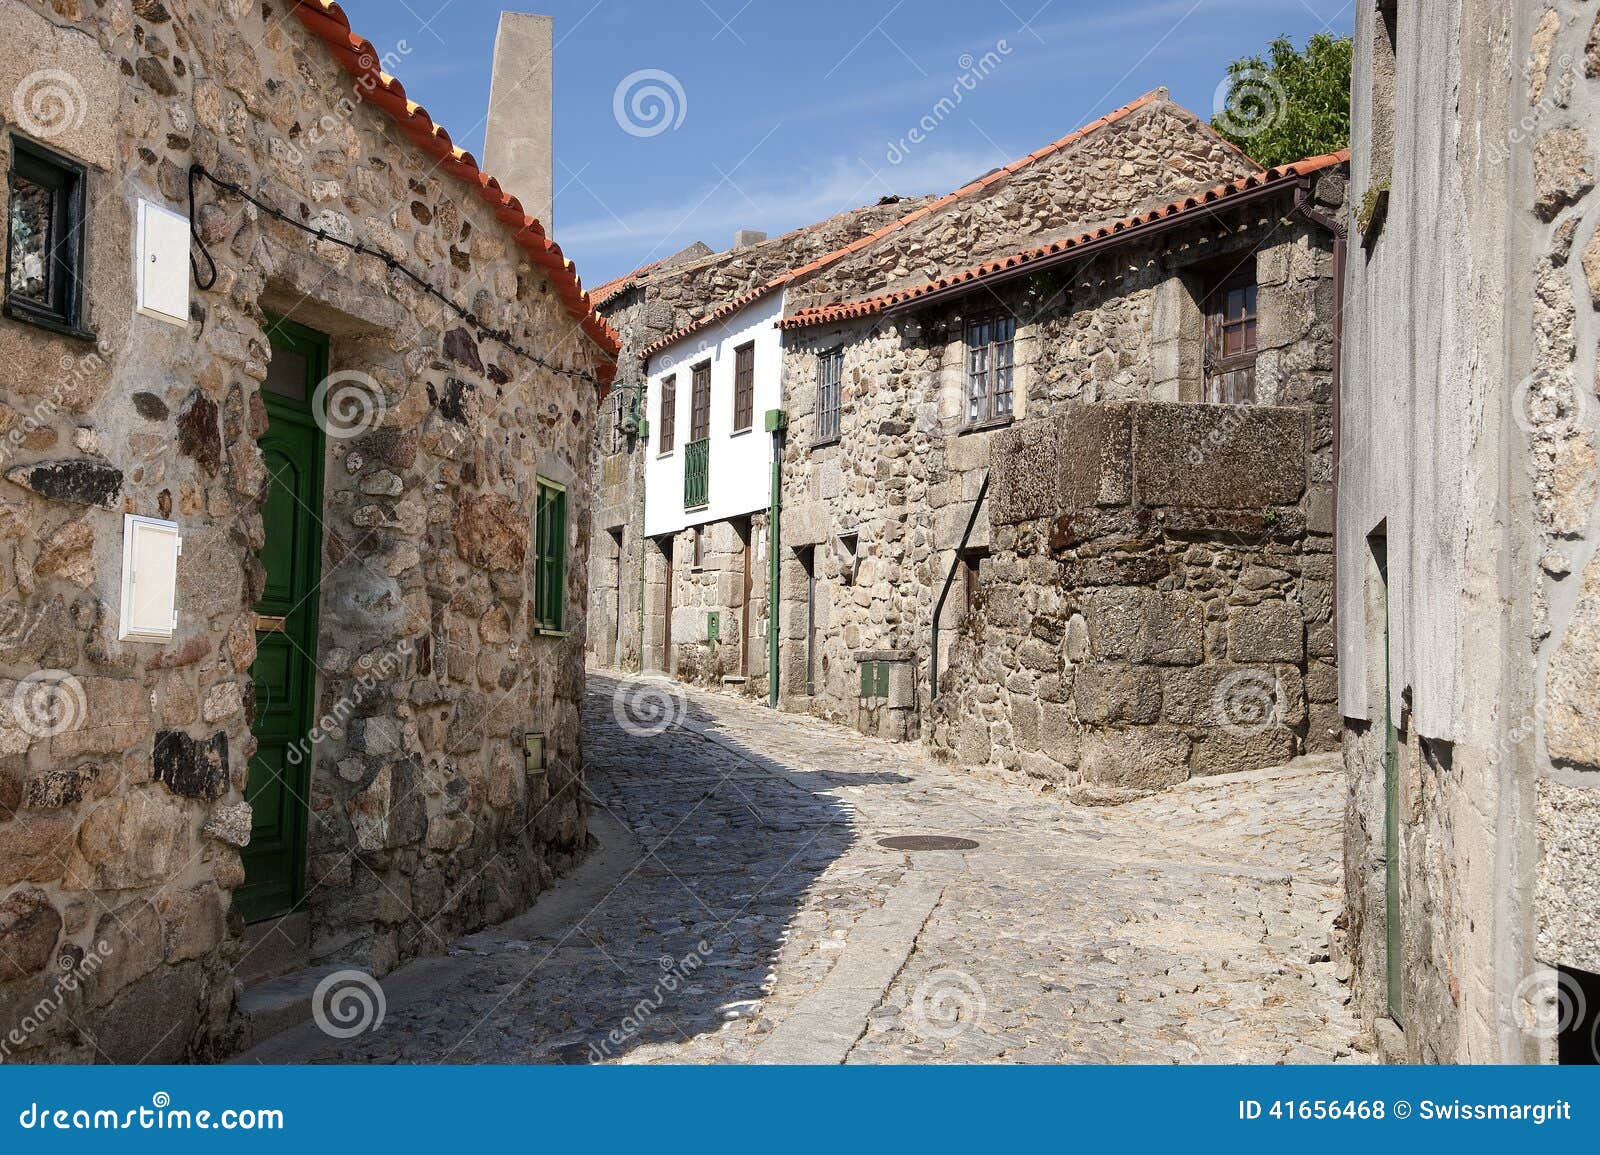 old historic village of linhares da beira in portugal